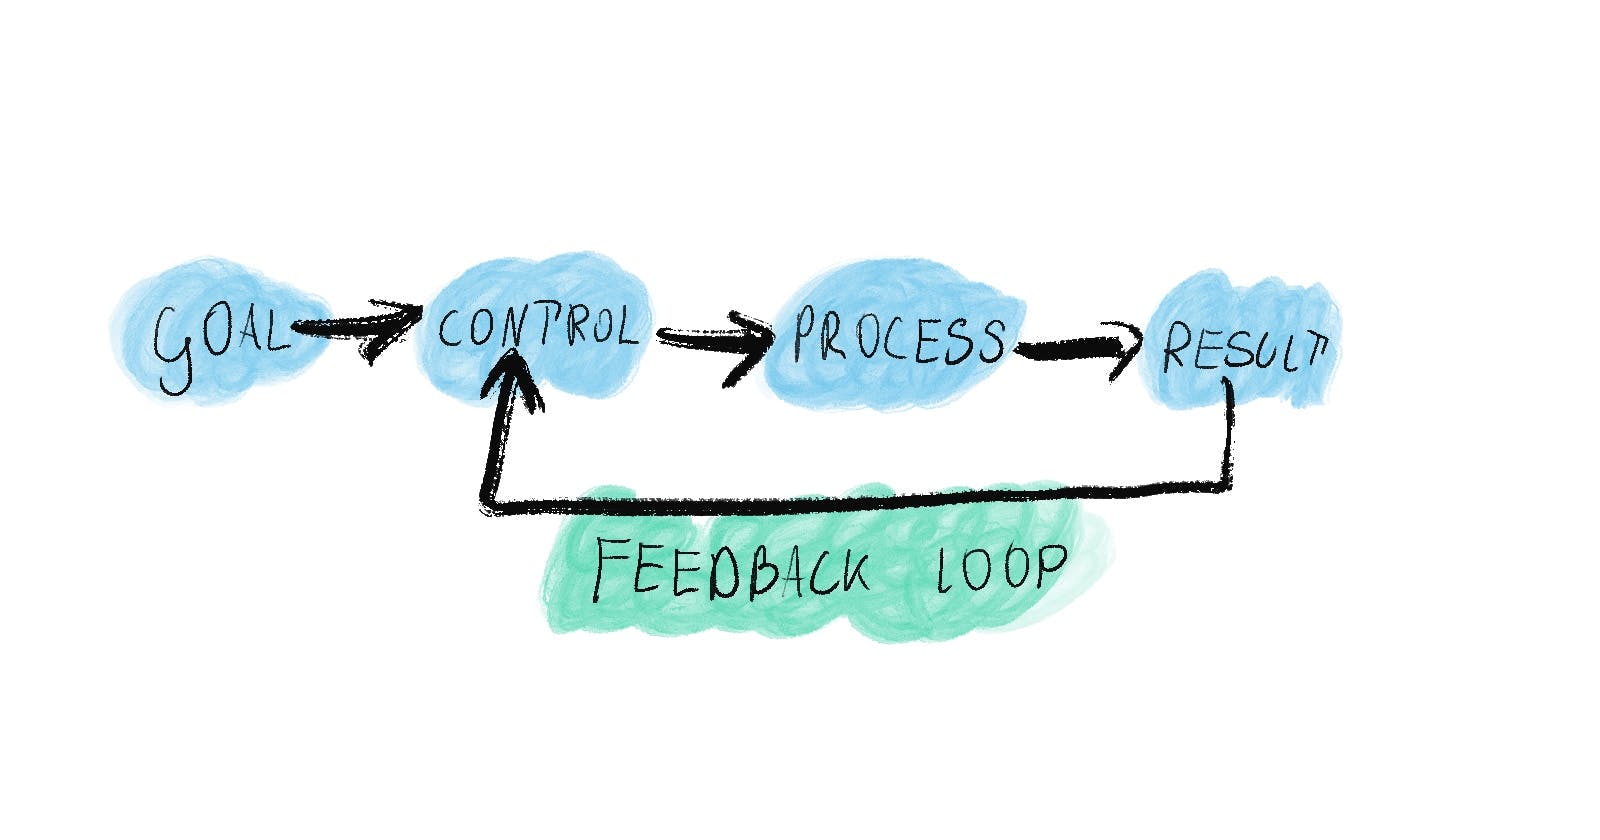 How to speed up your progress with feedback